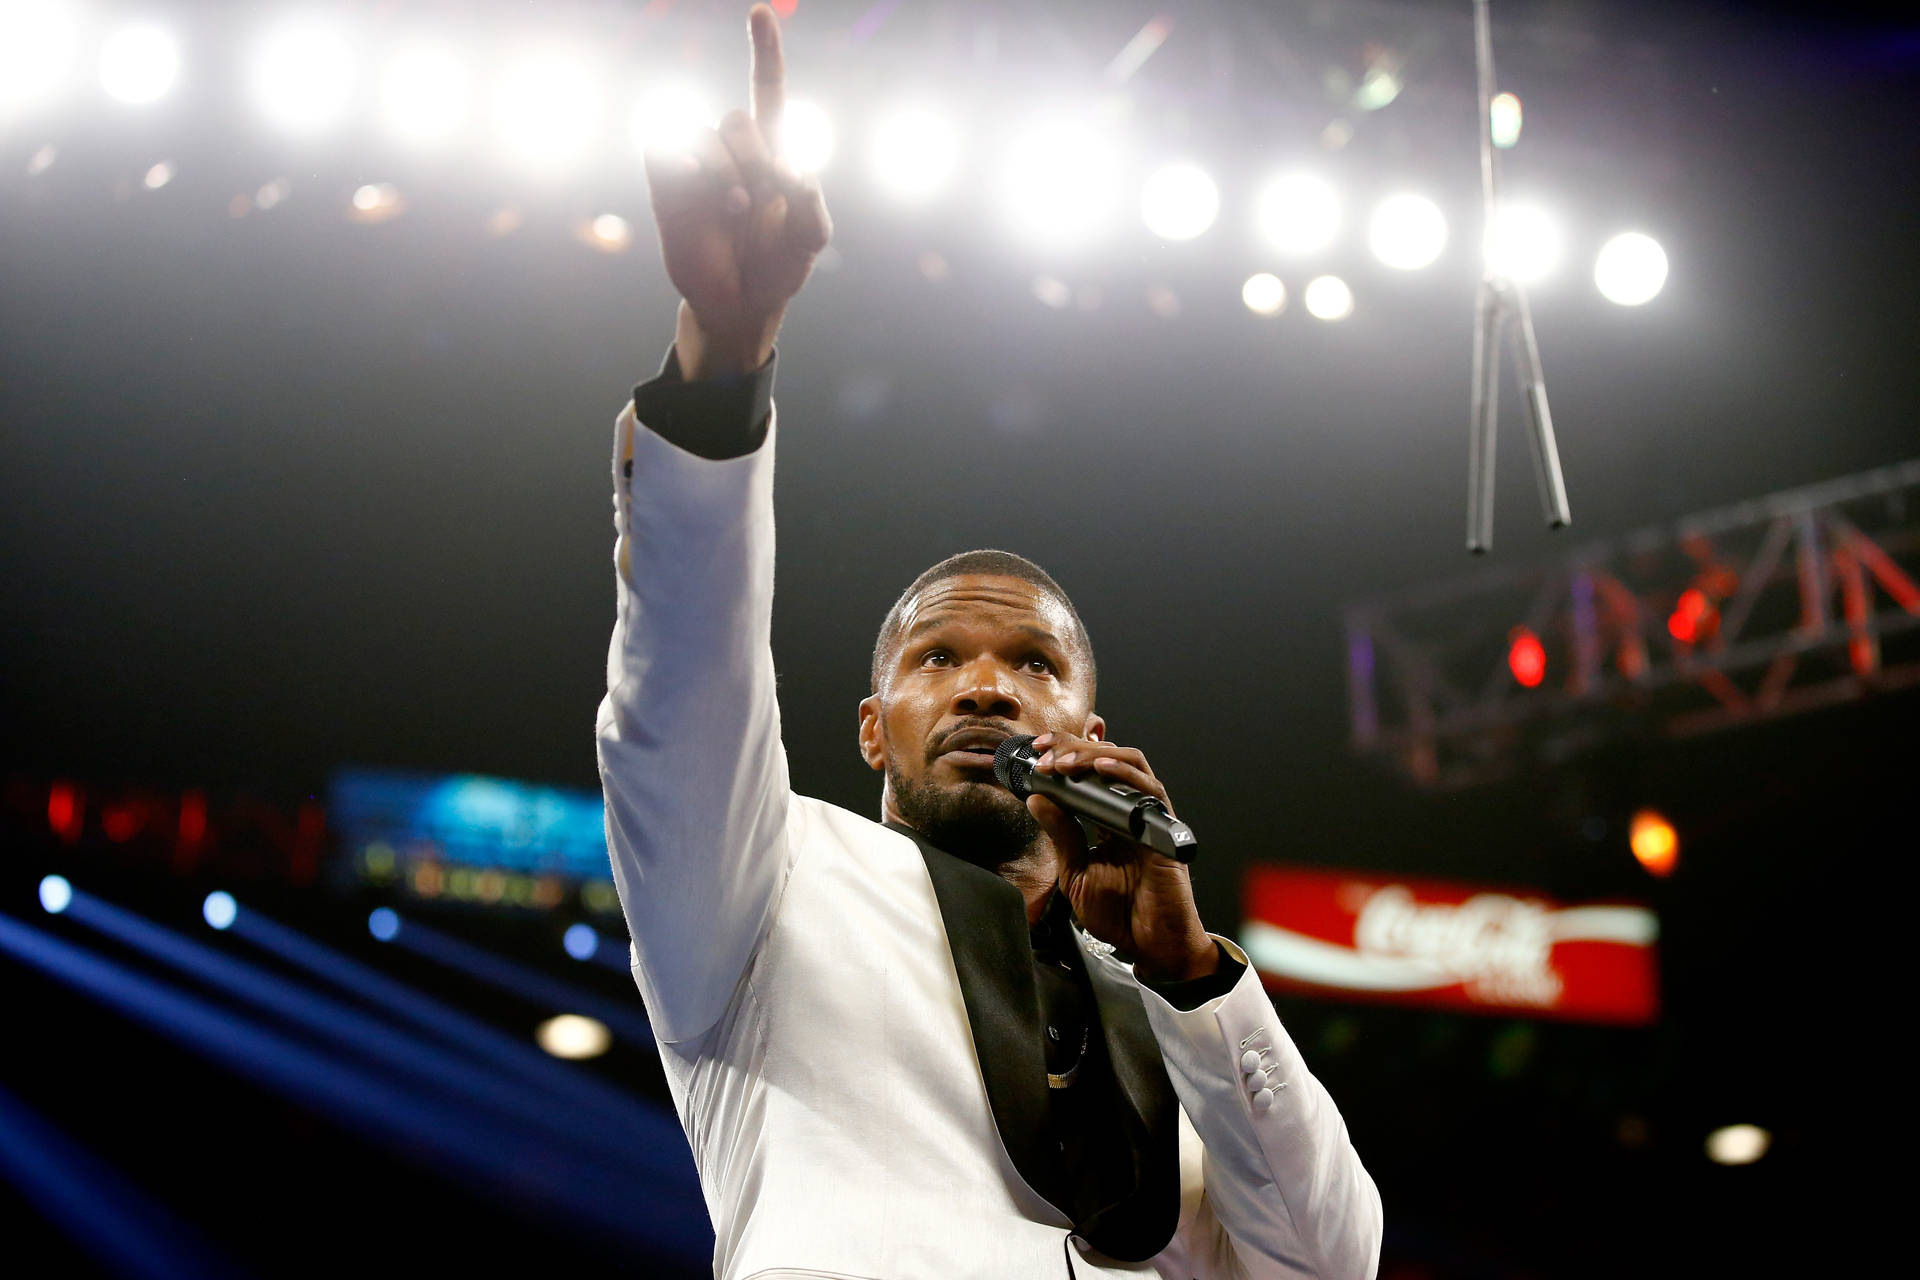 Actor Jamie Foxx Smiles While Attending The Mayweather Vs Pacquiao Boxing Match Background